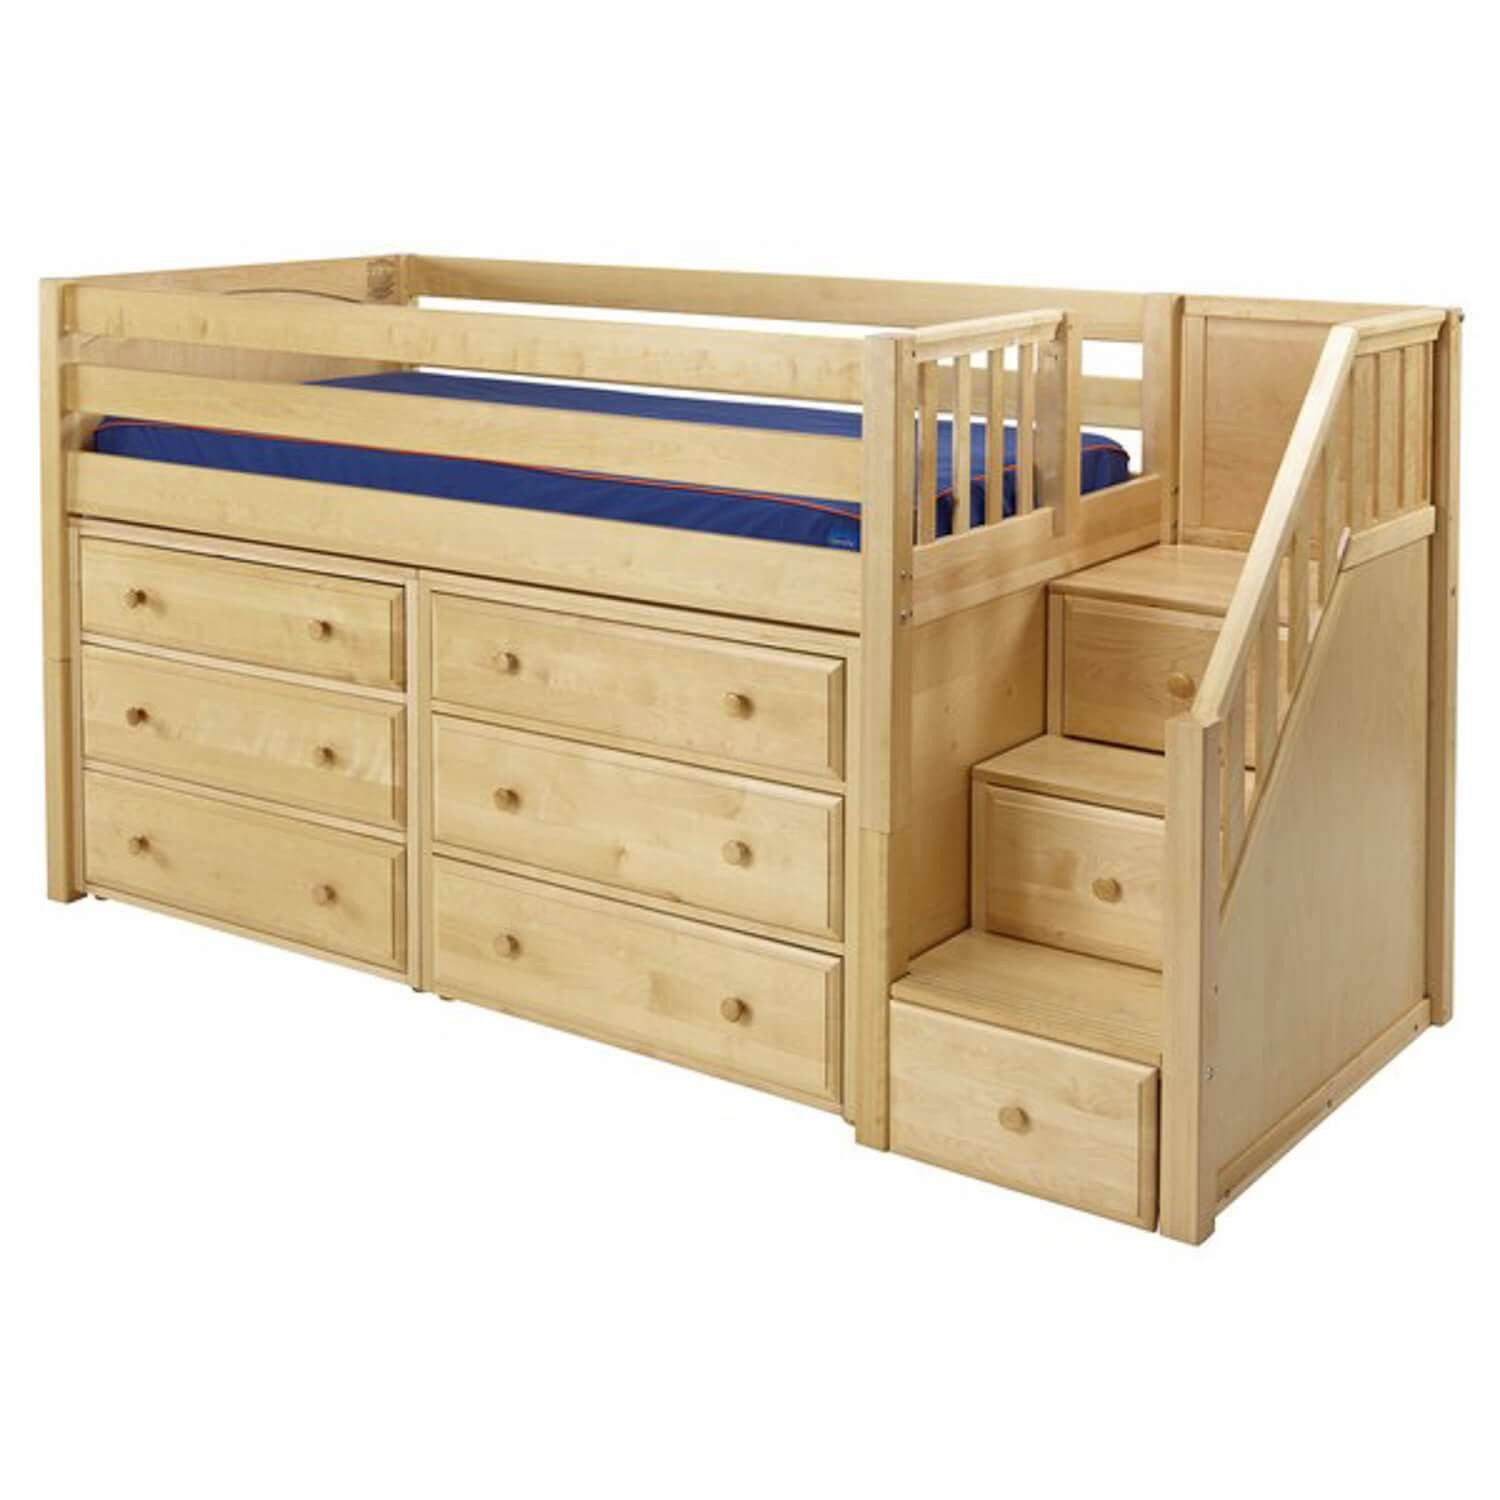 Childrens Bunk Bed With Storage
 Rupert Bunk Beds with Storage